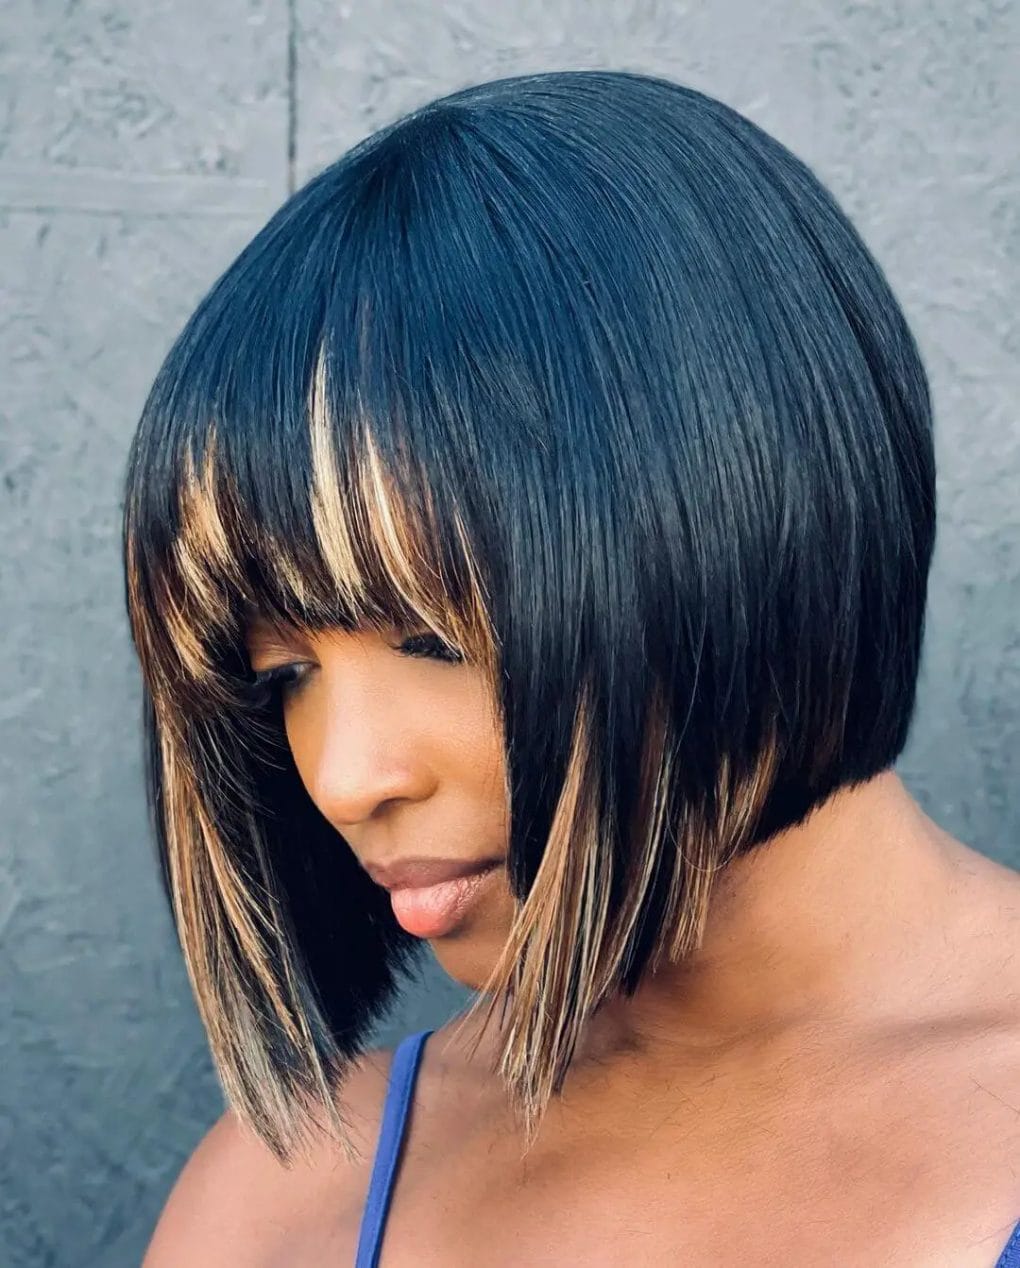 Precision-cut bob with black and blonde highlights.